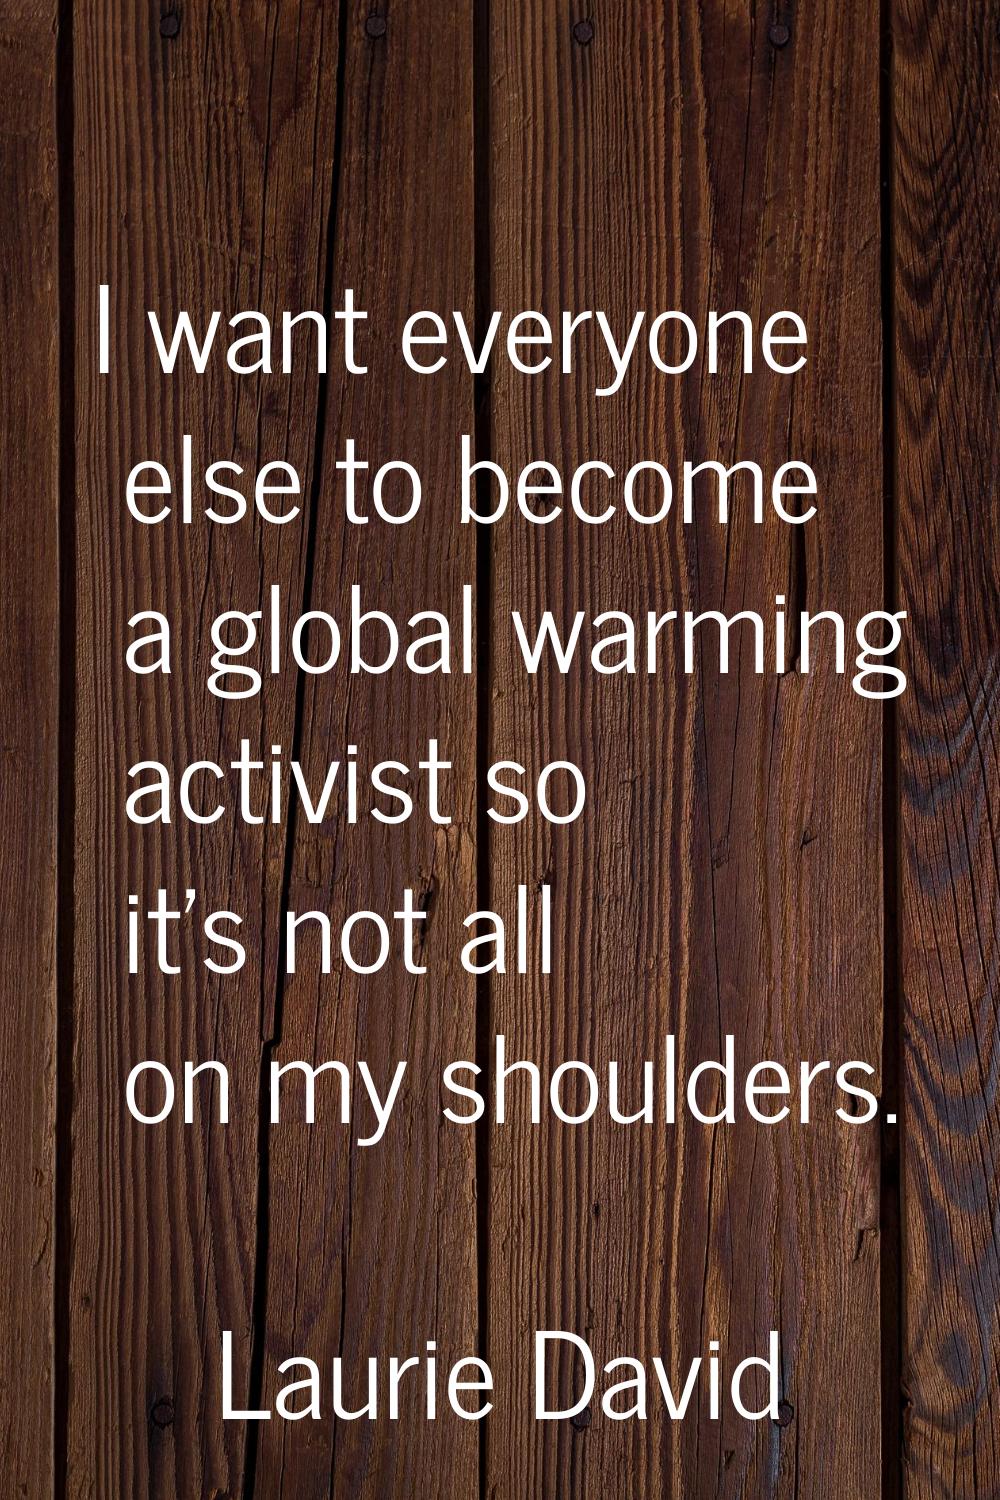 I want everyone else to become a global warming activist so it's not all on my shoulders.